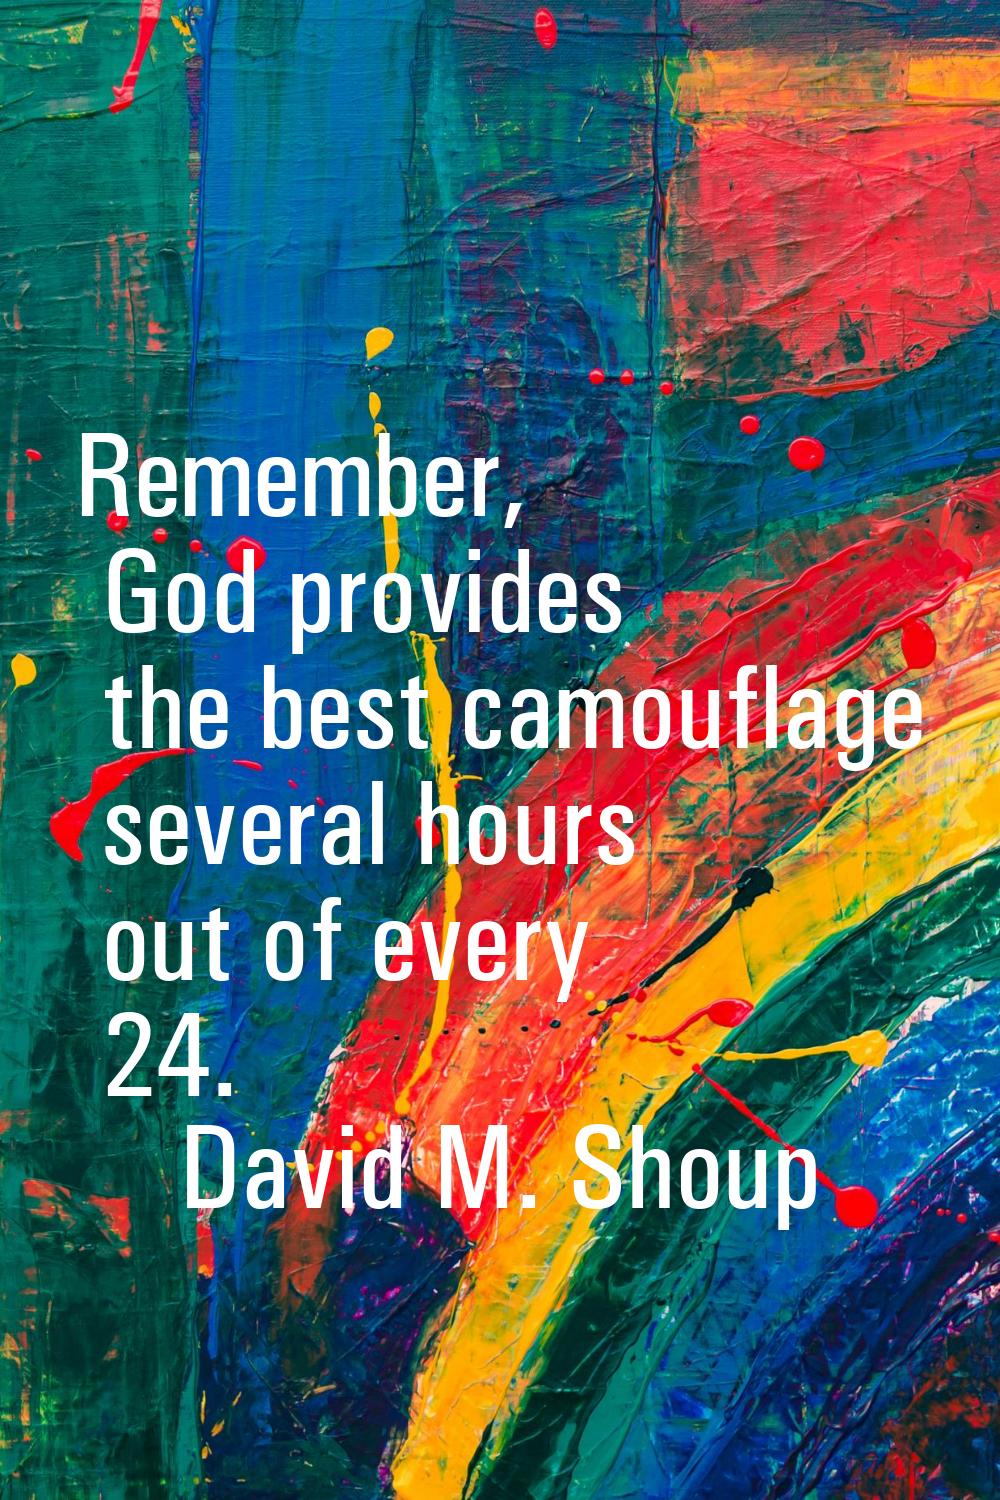 Remember, God provides the best camouflage several hours out of every 24.